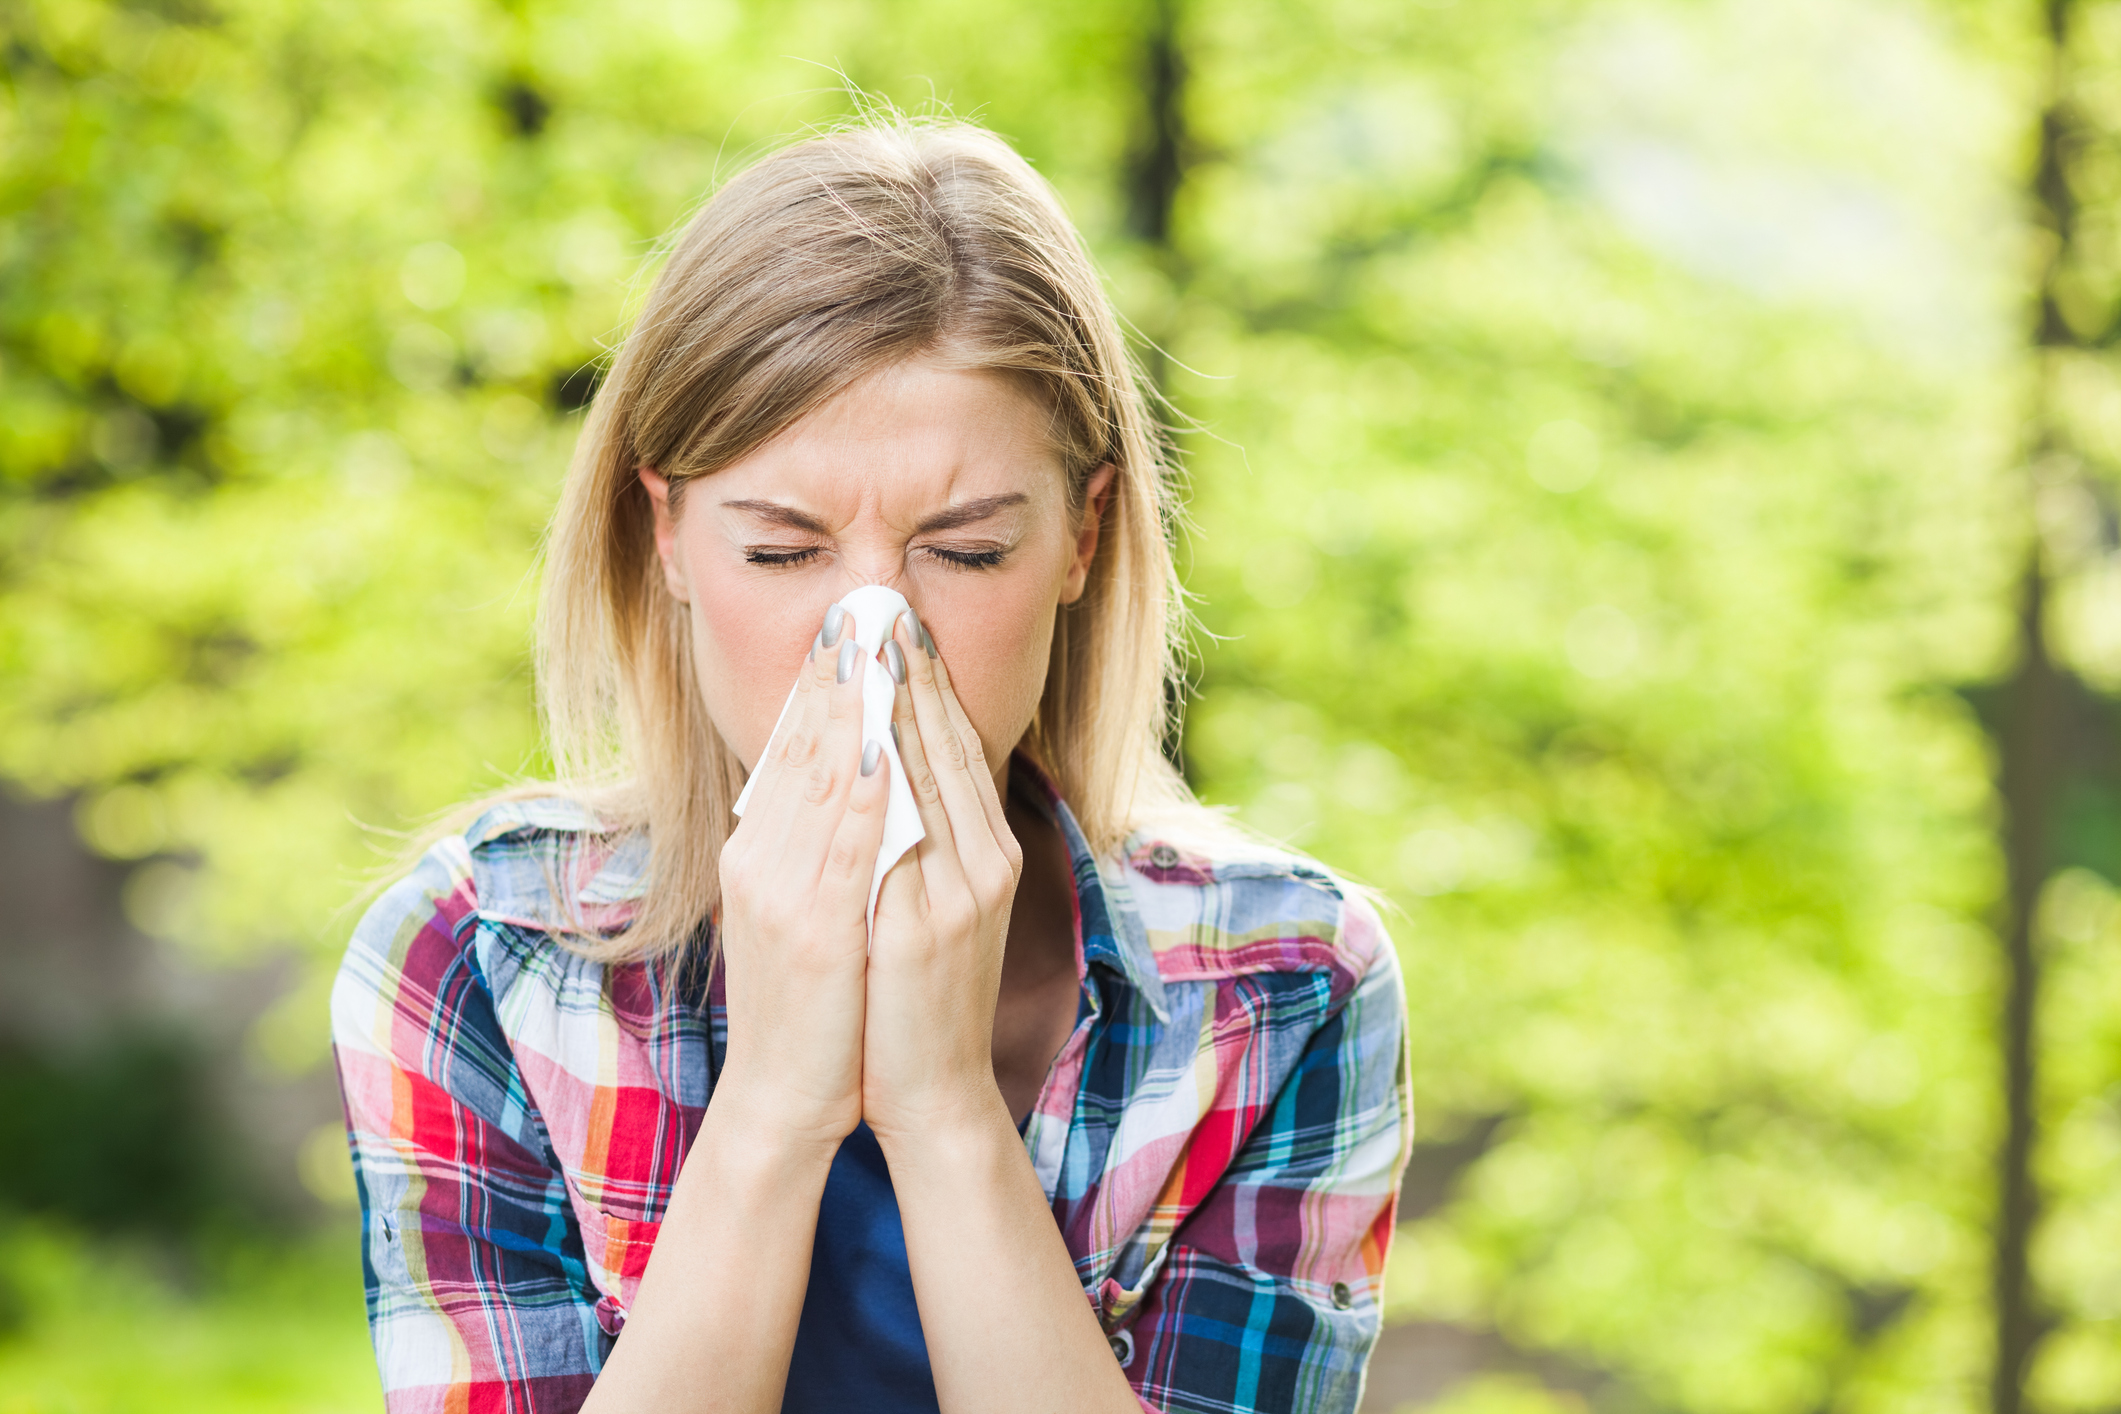 Allergy Overview: Symptoms, Treatments, and More